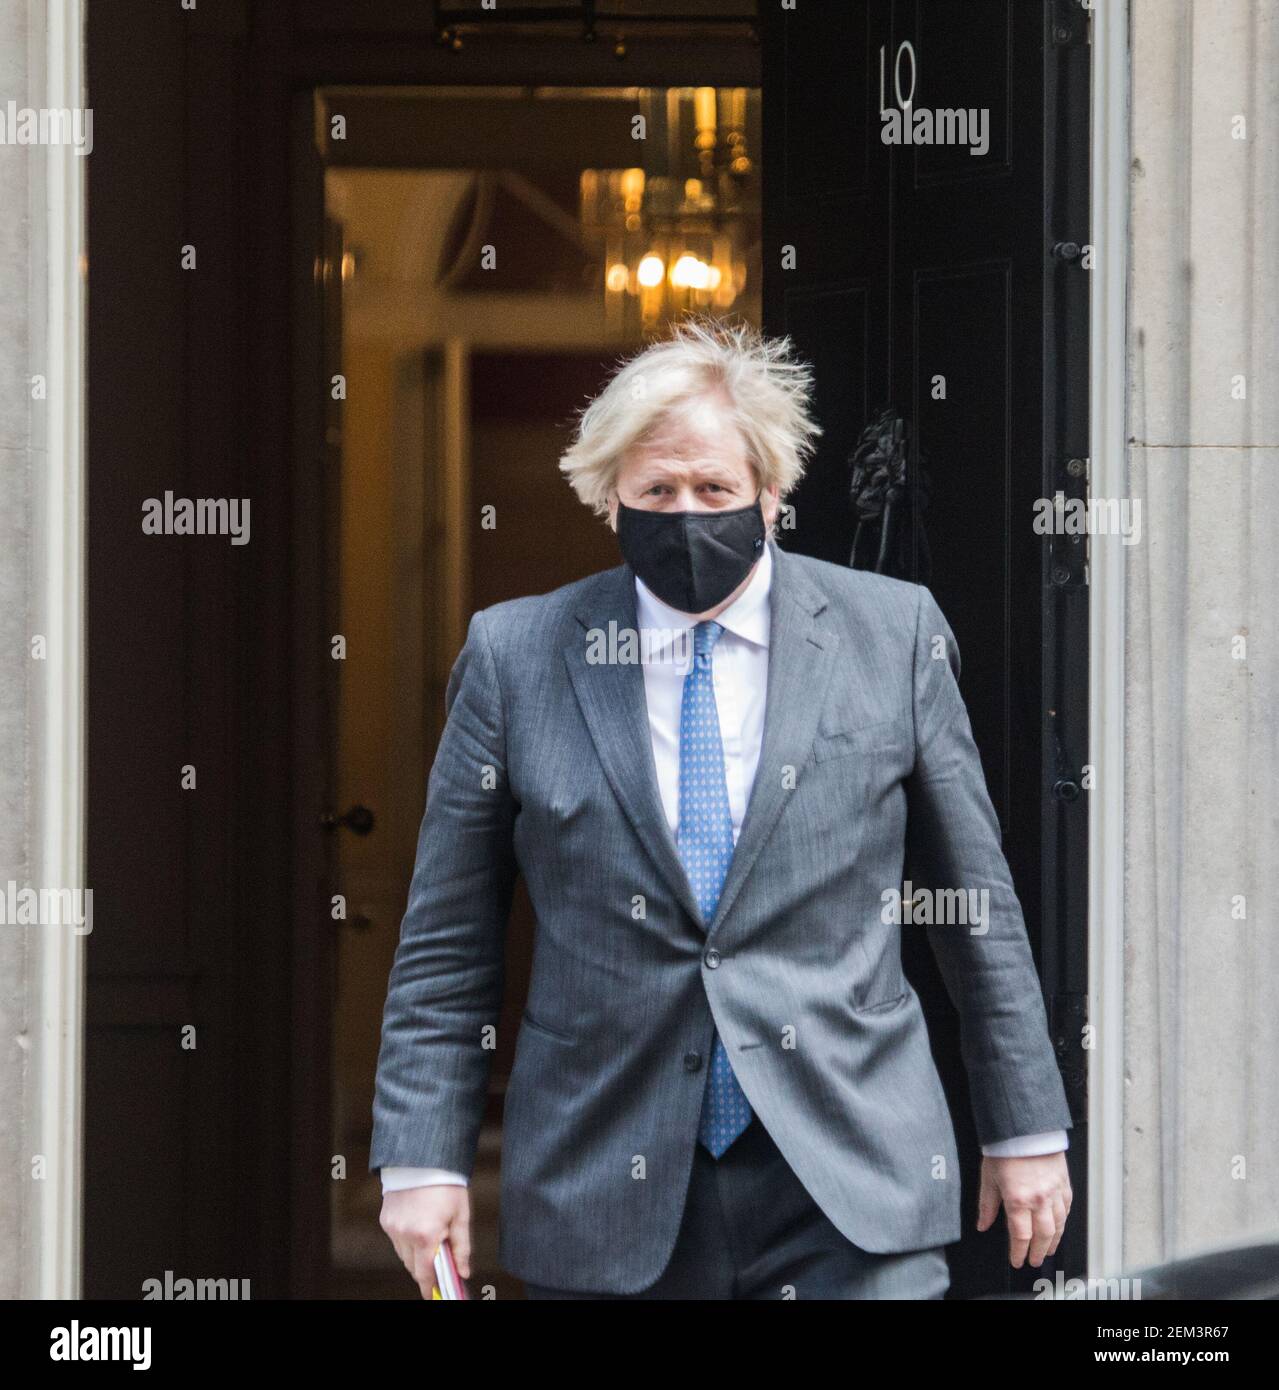 London UK 24 February 2021 The prime minister Boris Johnson leaving 10 Downing Street to attend the PM questions, showing is newly hair trim done by his Girlfriend Carrie Symonds.Paul  Quezada-Neiman/Alamy Live News Stock Photo